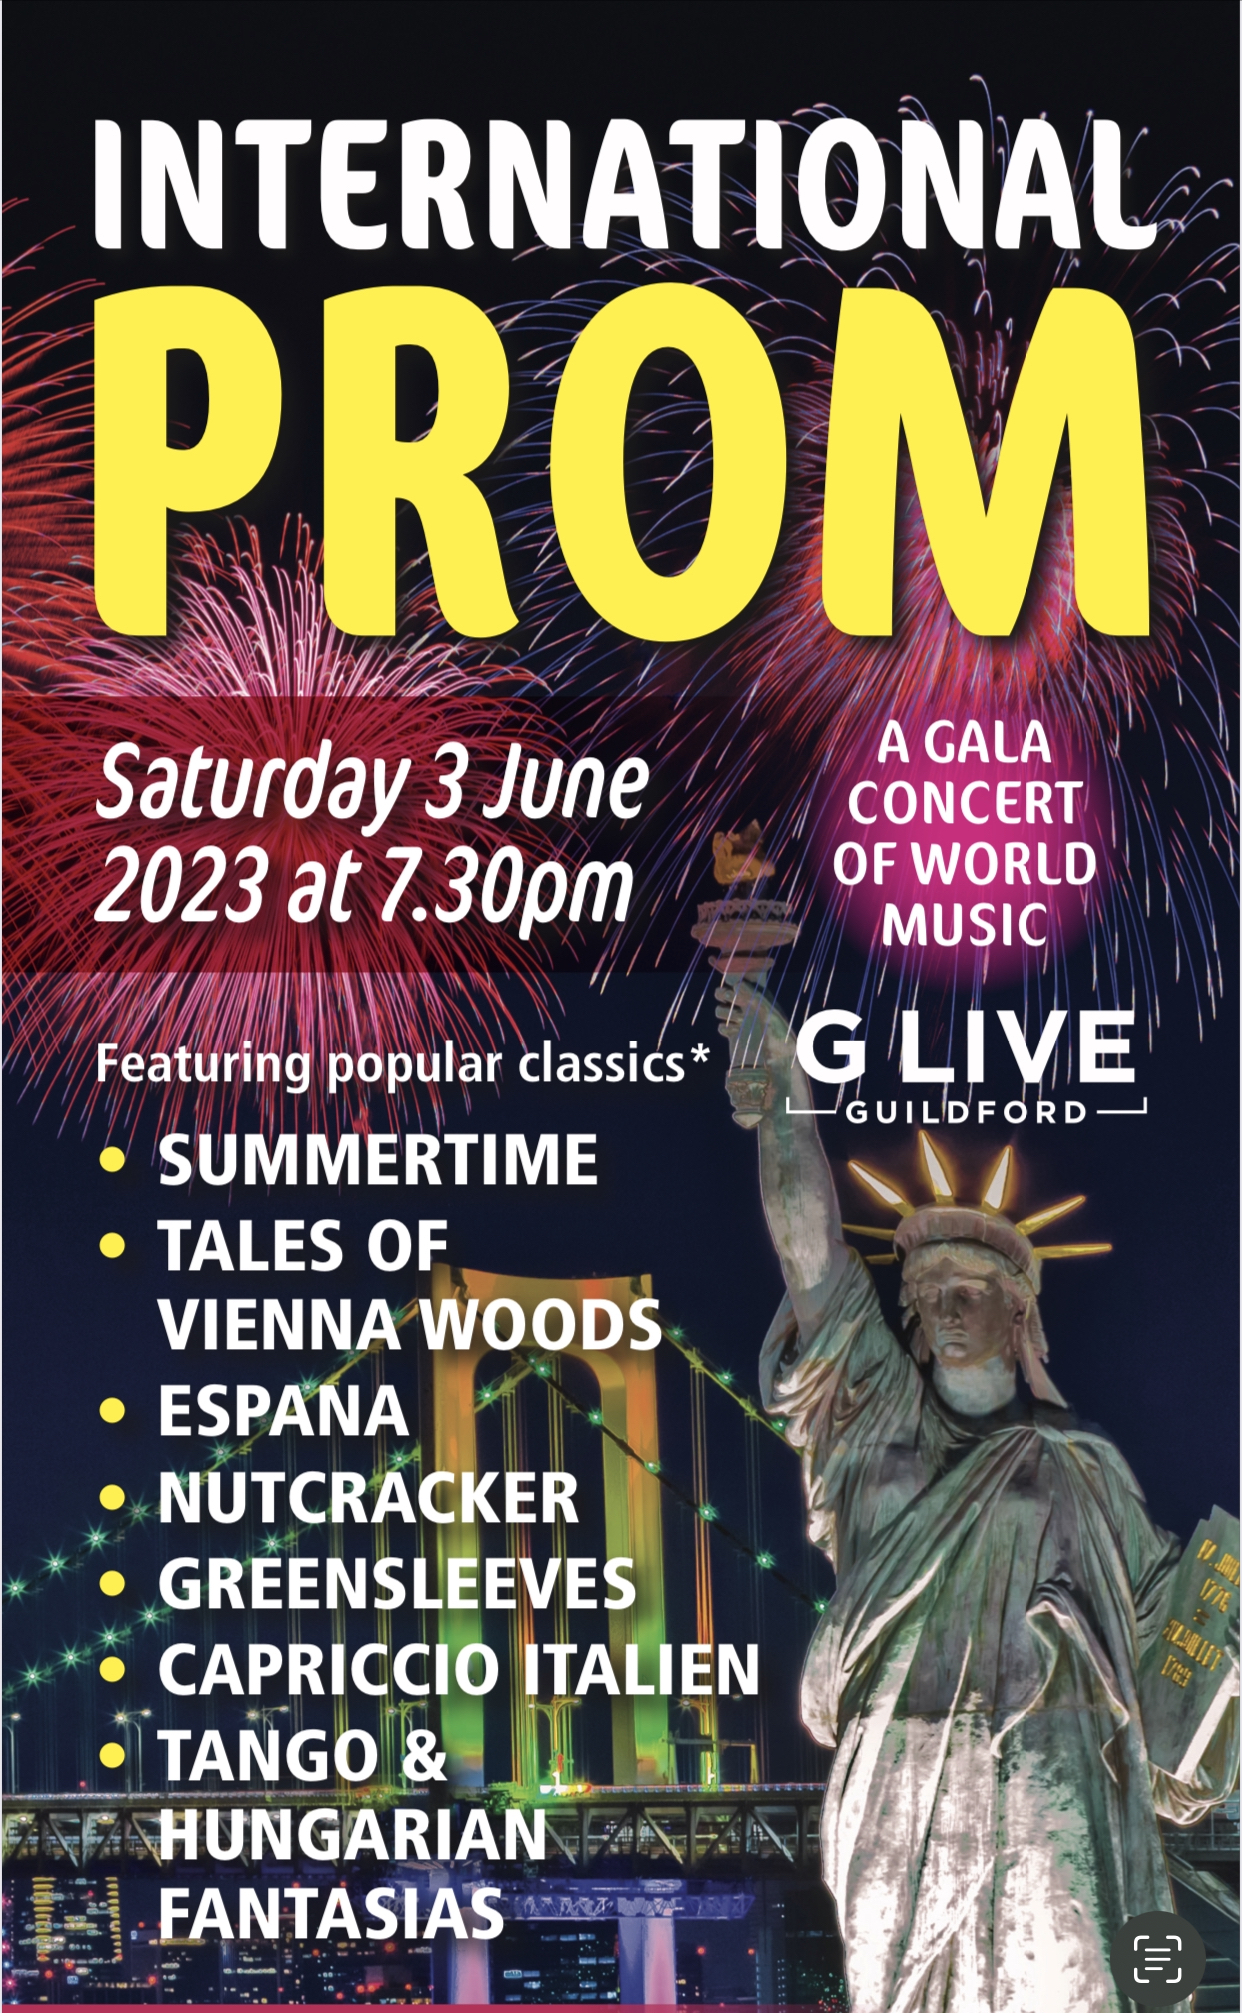 Guildford Symphony Orchestra Concert - "International Prom - A Gala Concert of World Music"